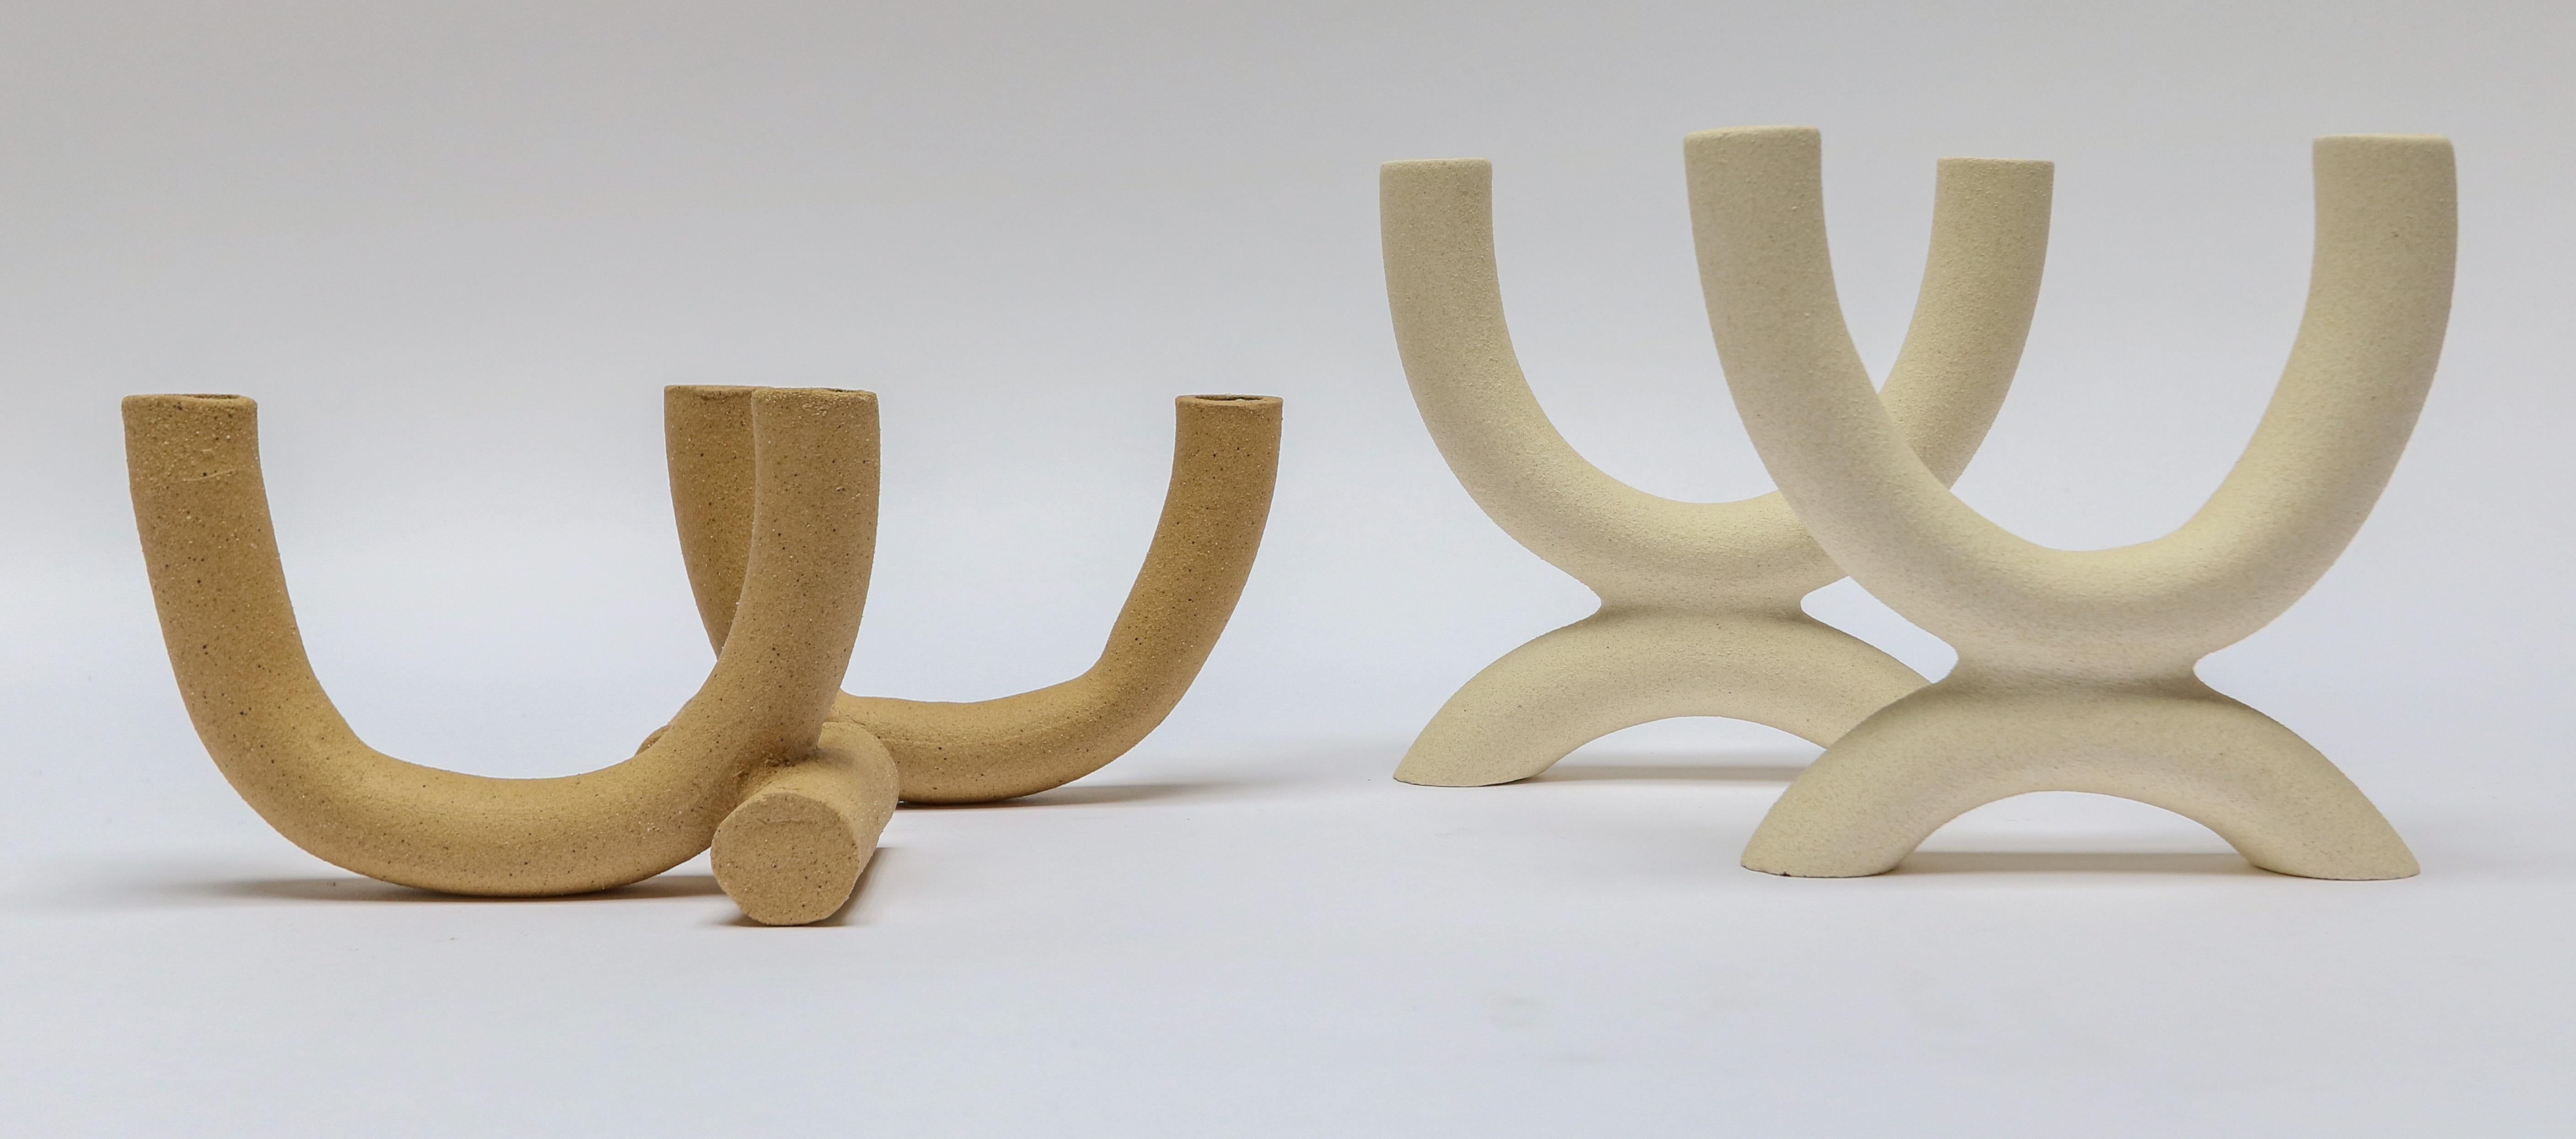 Handmade ceramic Forevermore & Harmony candle holders by Style Union Home in blanc white & birch tan. Both available in white & tan. Priced individually.

Forevermore candle holder (white) 7.5? x 1.25? x 7.5? H (400174)–$182 each
Harmony candle